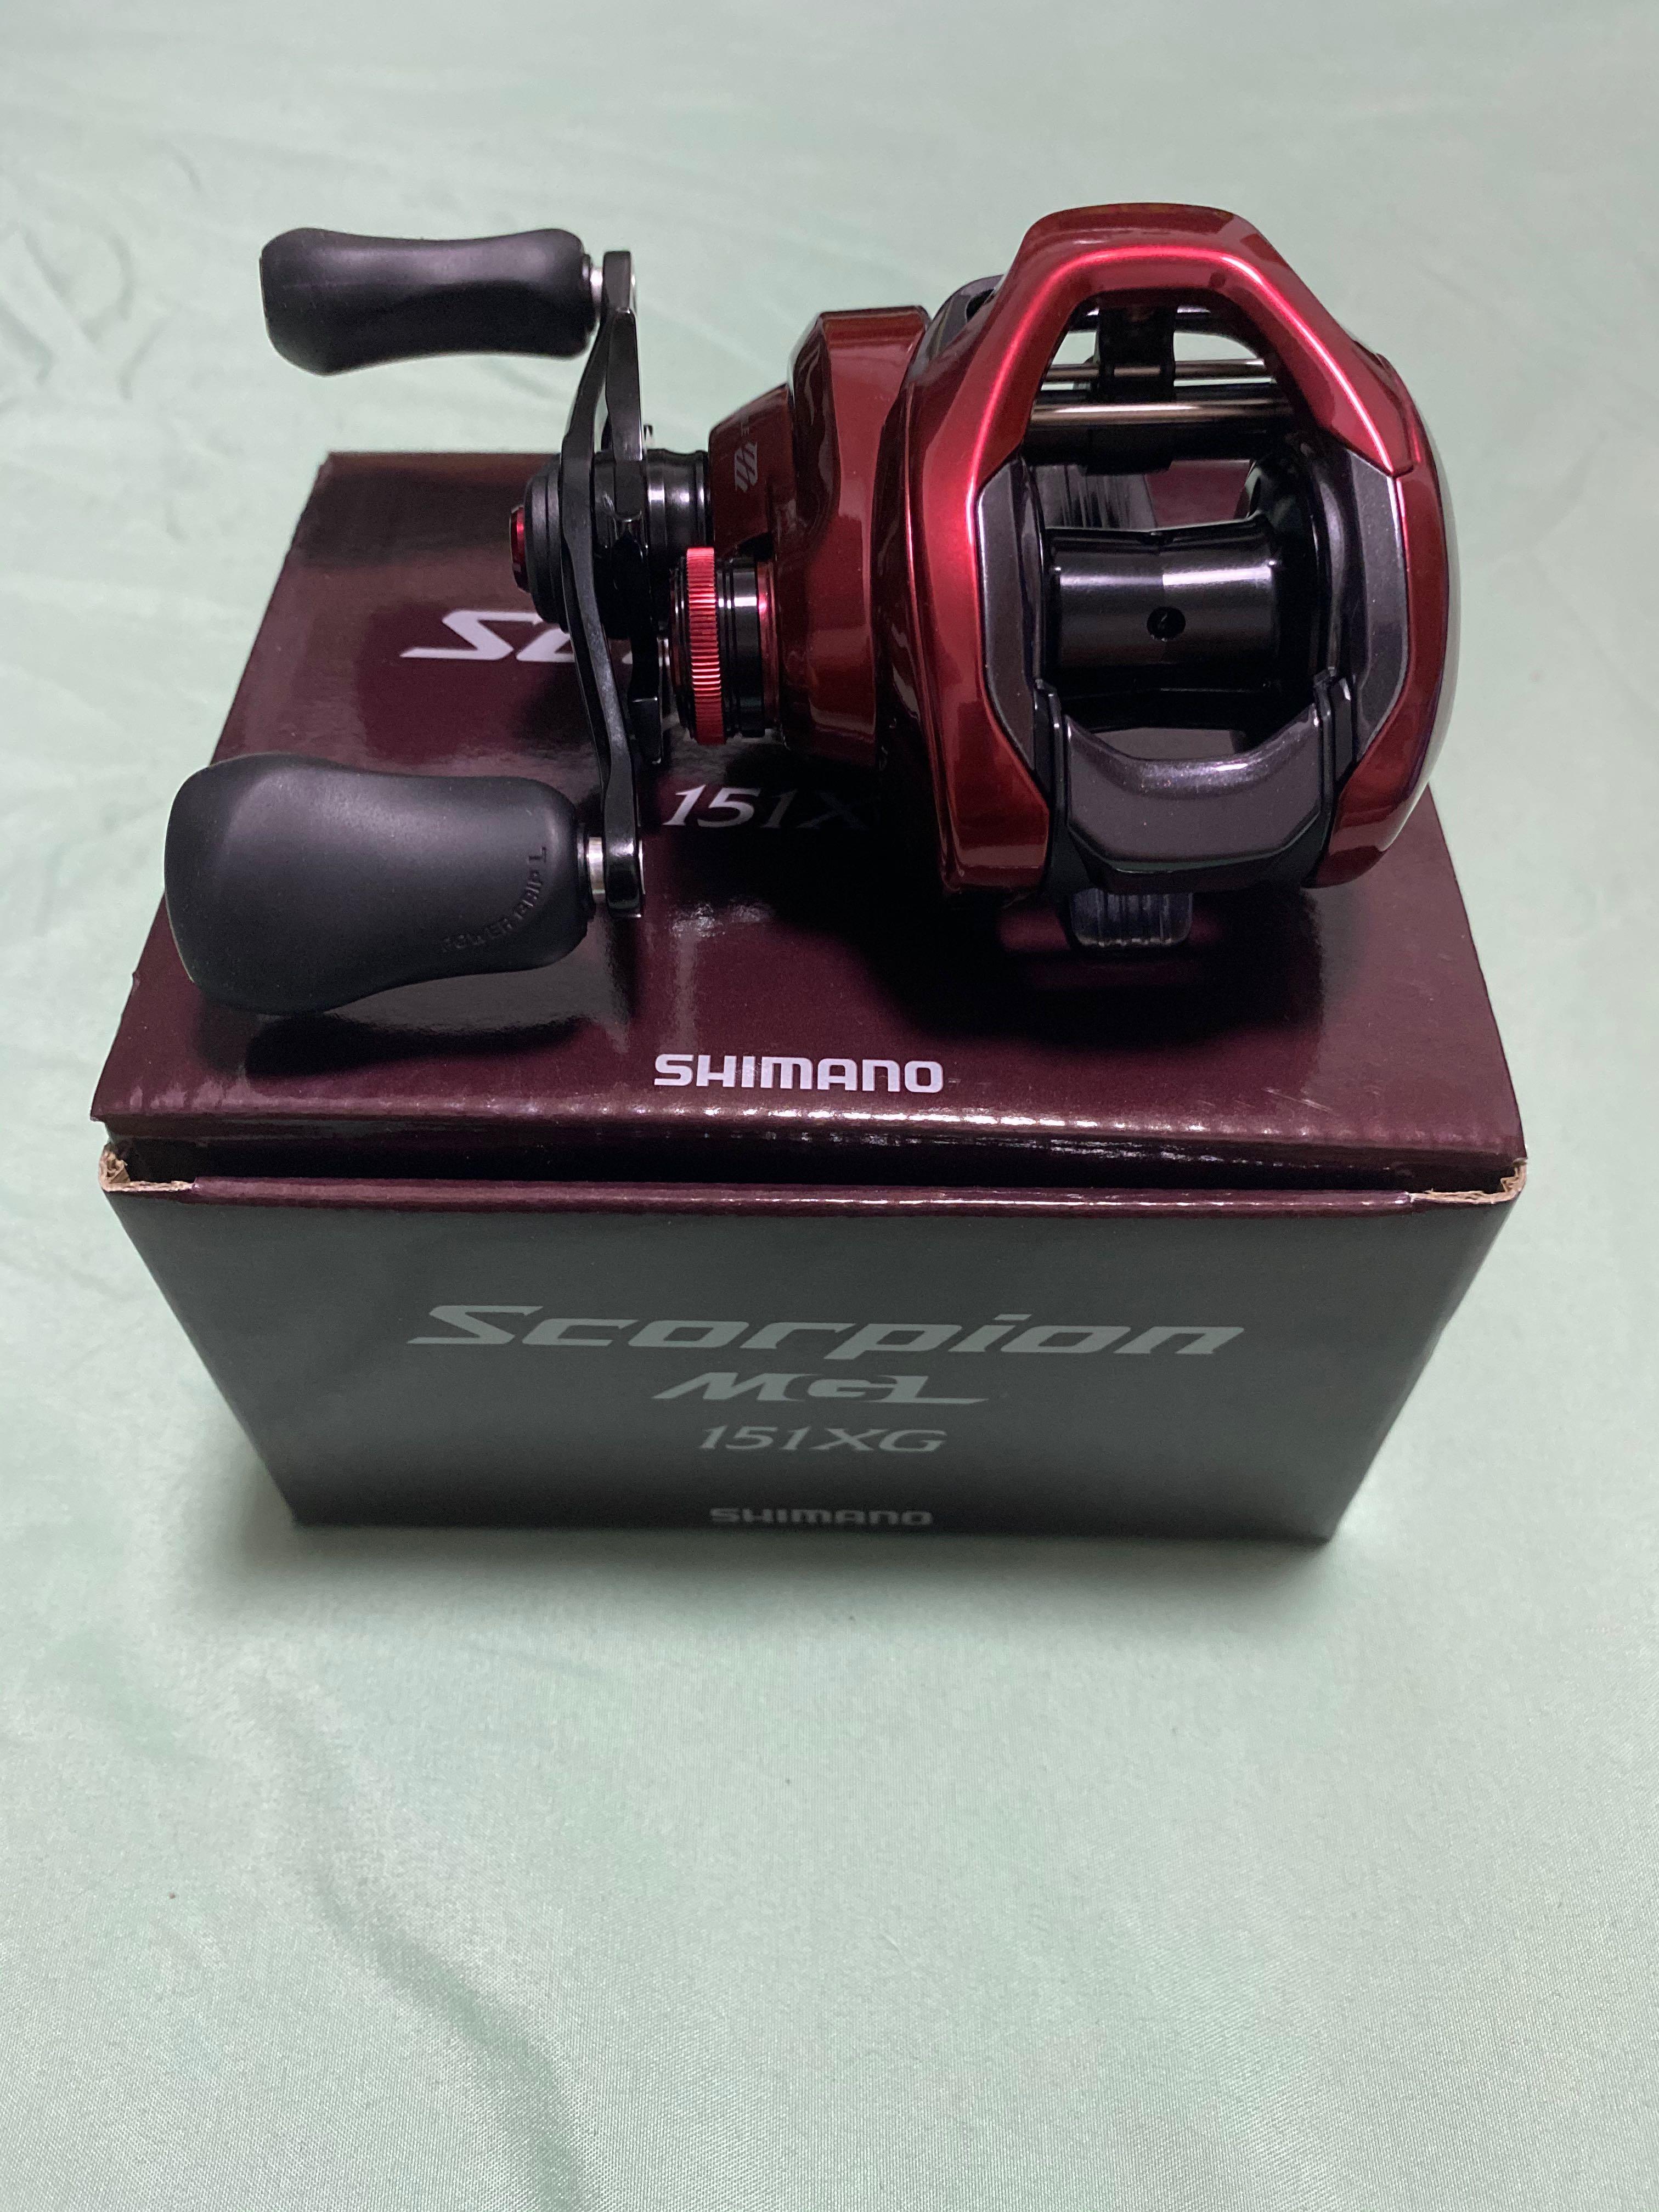 Bnib Shimano Scorpion Mgl 151xg Left Sports Equipment Bicycles Parts Parts Accessories On Carousell